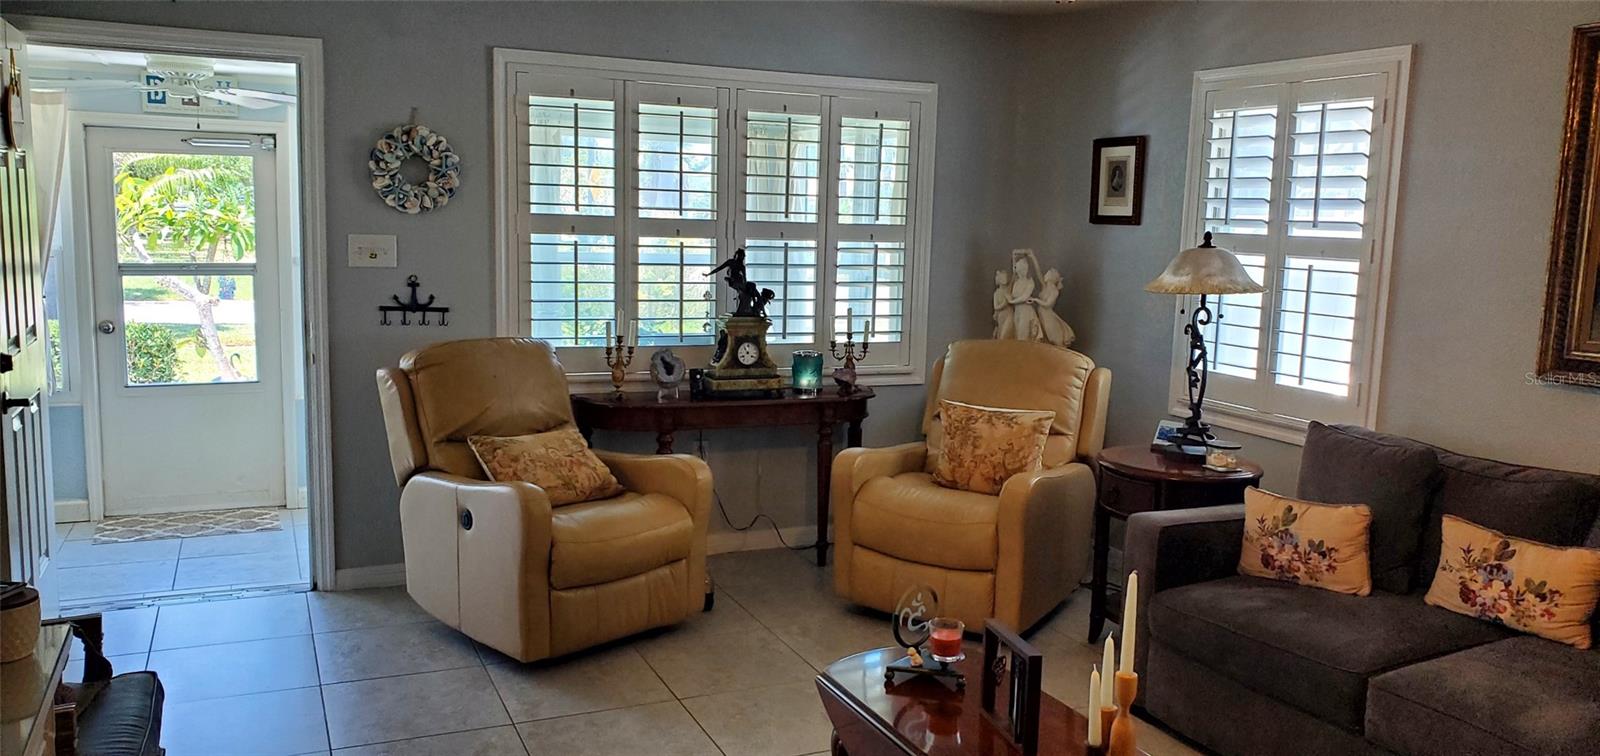 Living Room and Front Entry,  Bahama shutters on  all interior windows